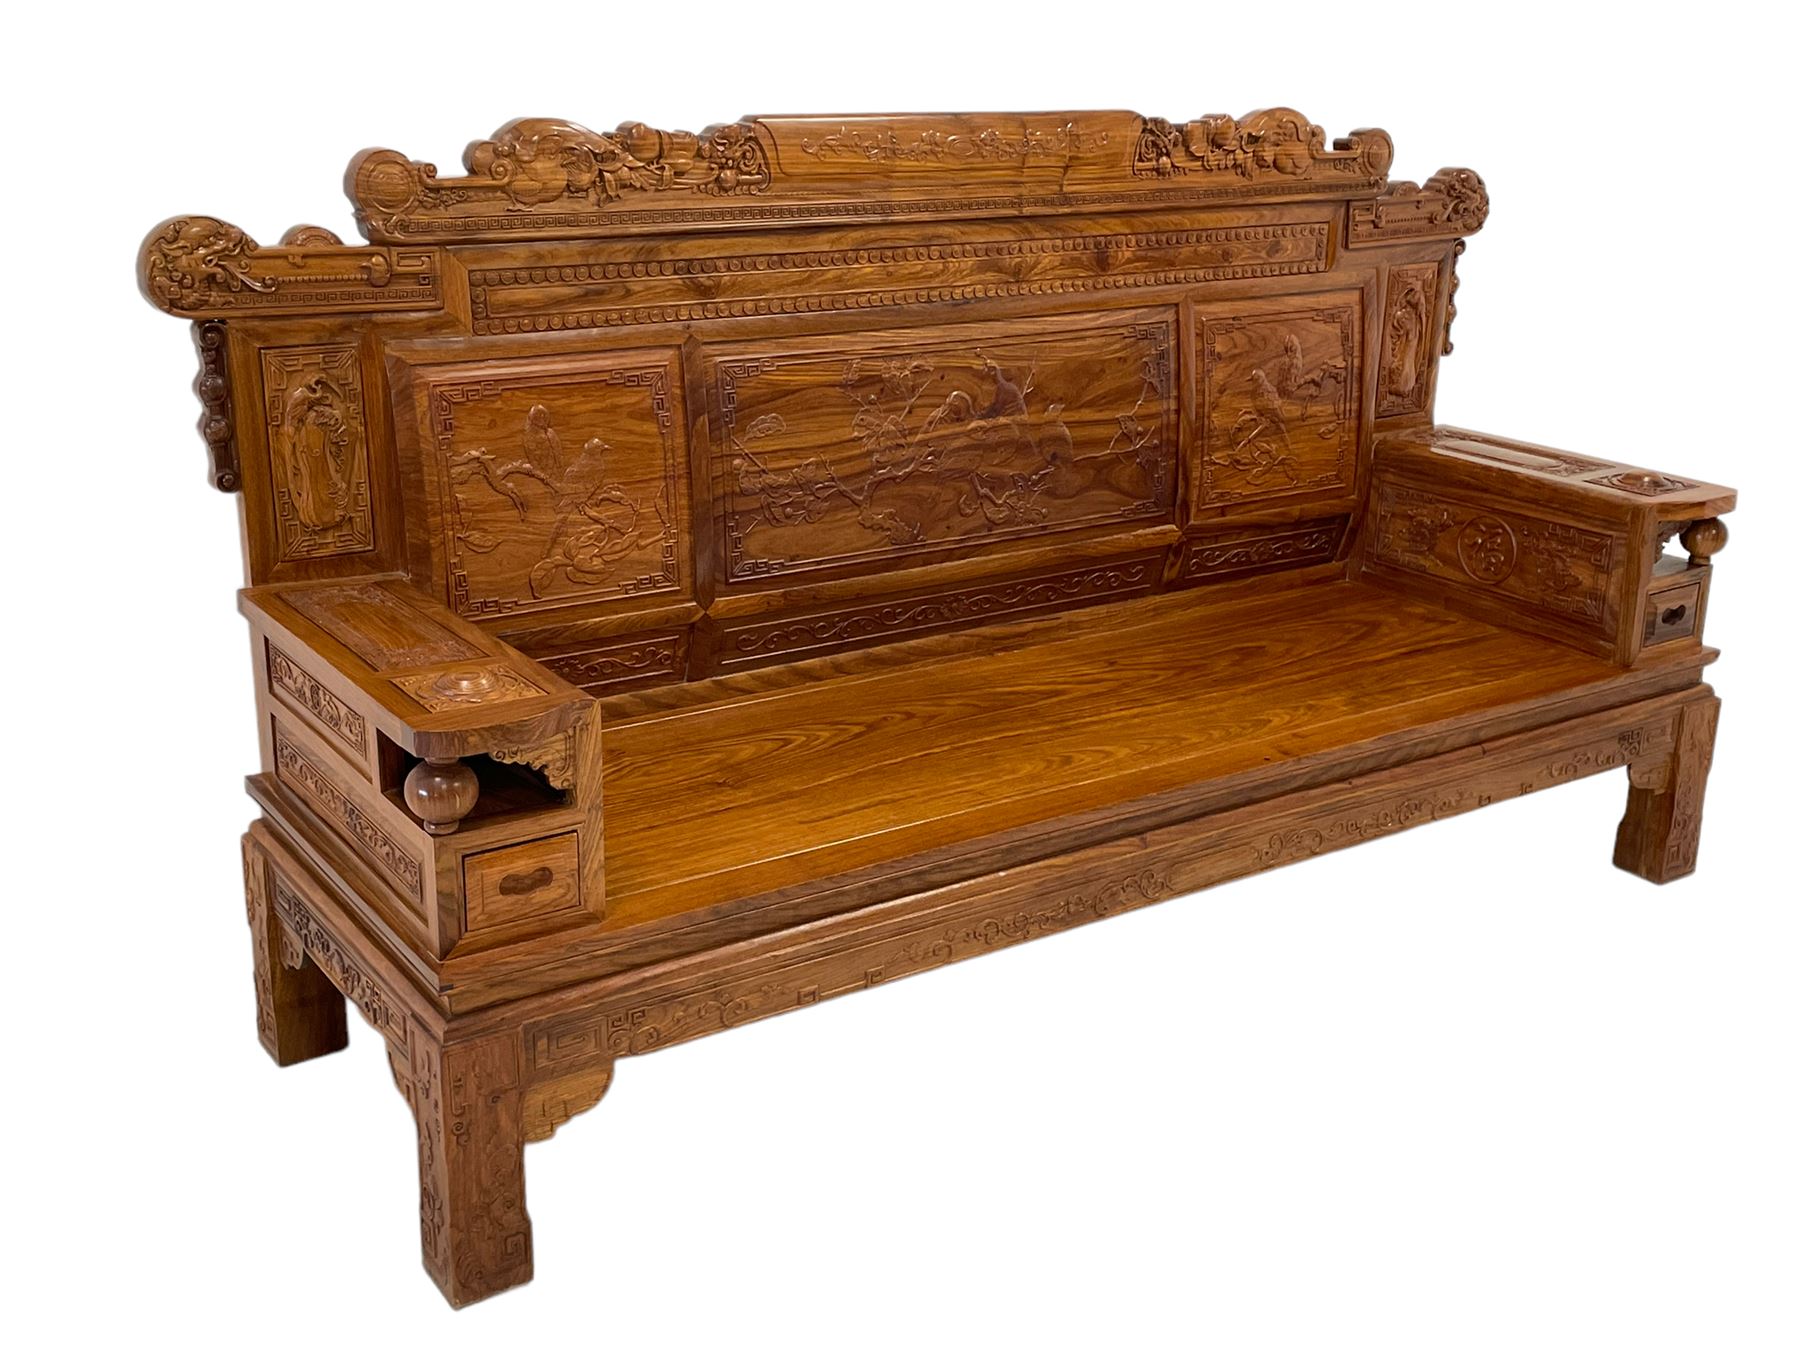 Chinese Imperial style hardwood throne room settee or sofa - Image 2 of 9